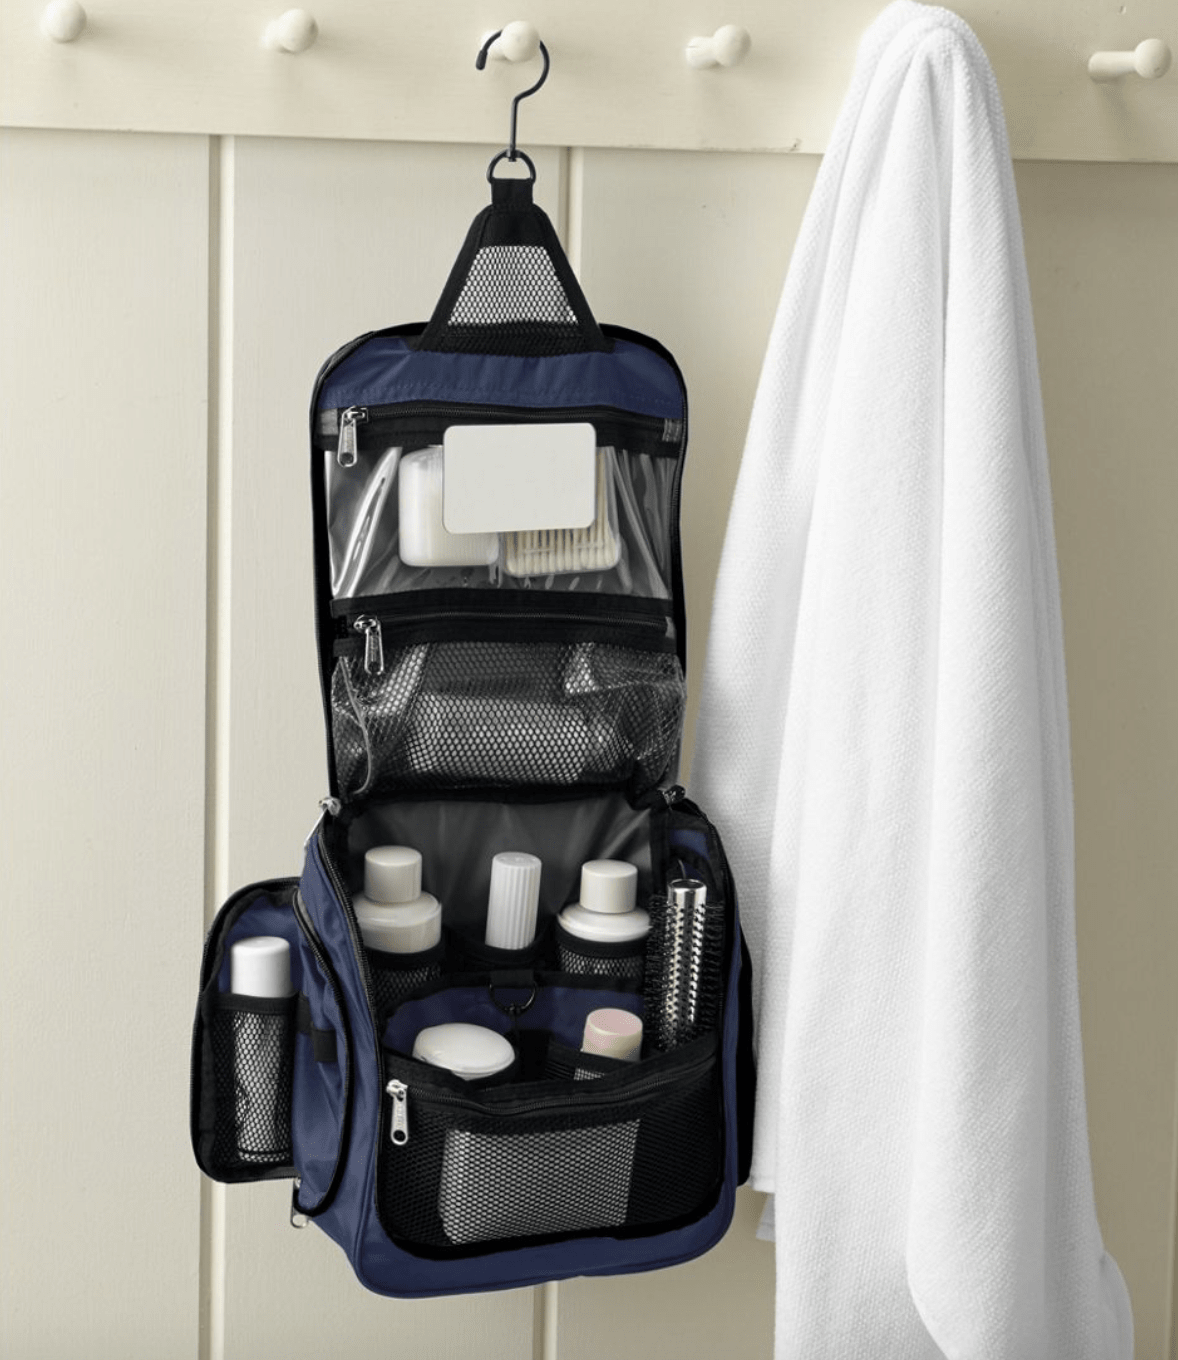 What's new in luggage accessories – The Denver Post